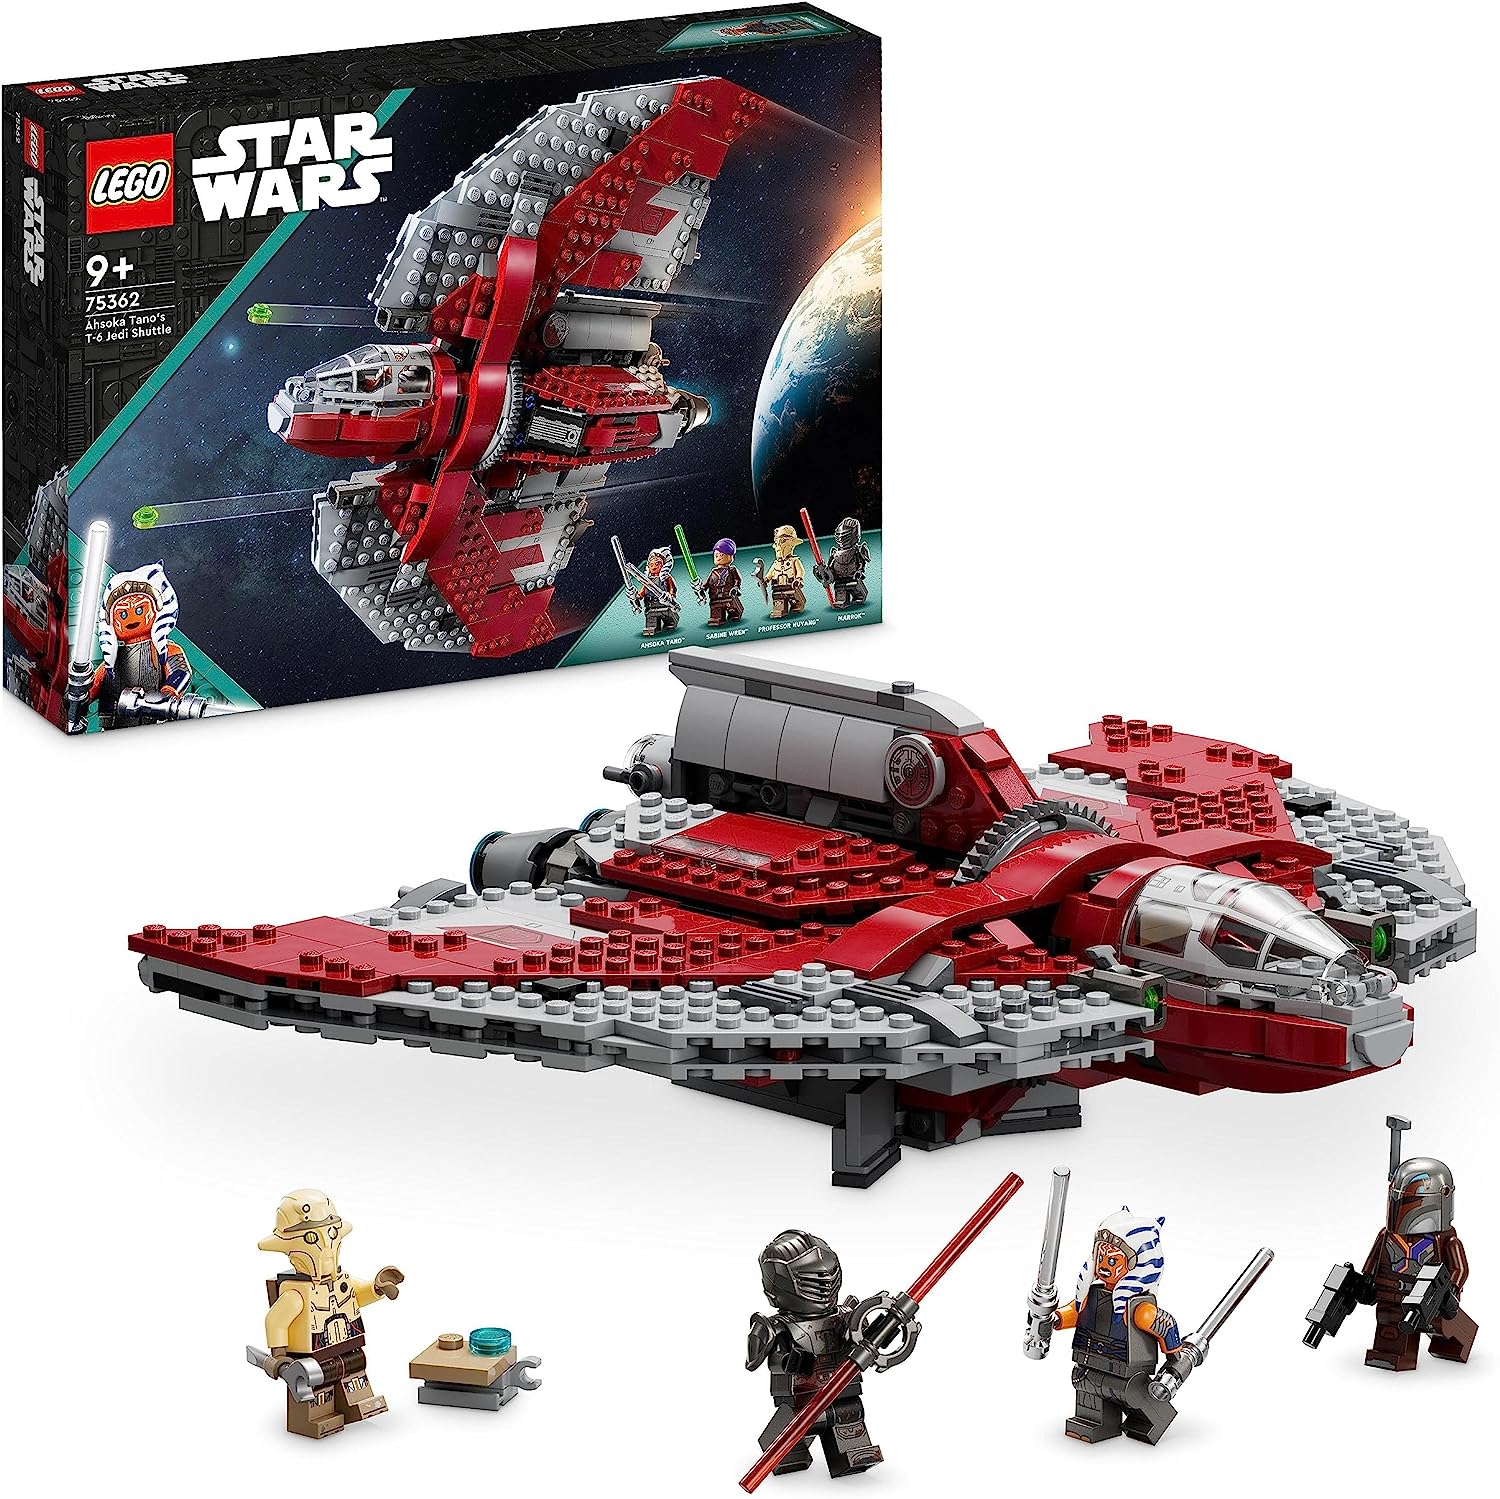 LEGO 75362 Star Wars Ahsoka Tanos T-6 Jedi Shuttle Set, Buildable Spaceship Toy With 4 Mini Figures Including Sabine Wren and Marrok with Lightsabers, Gift for Ahsoka Series fans